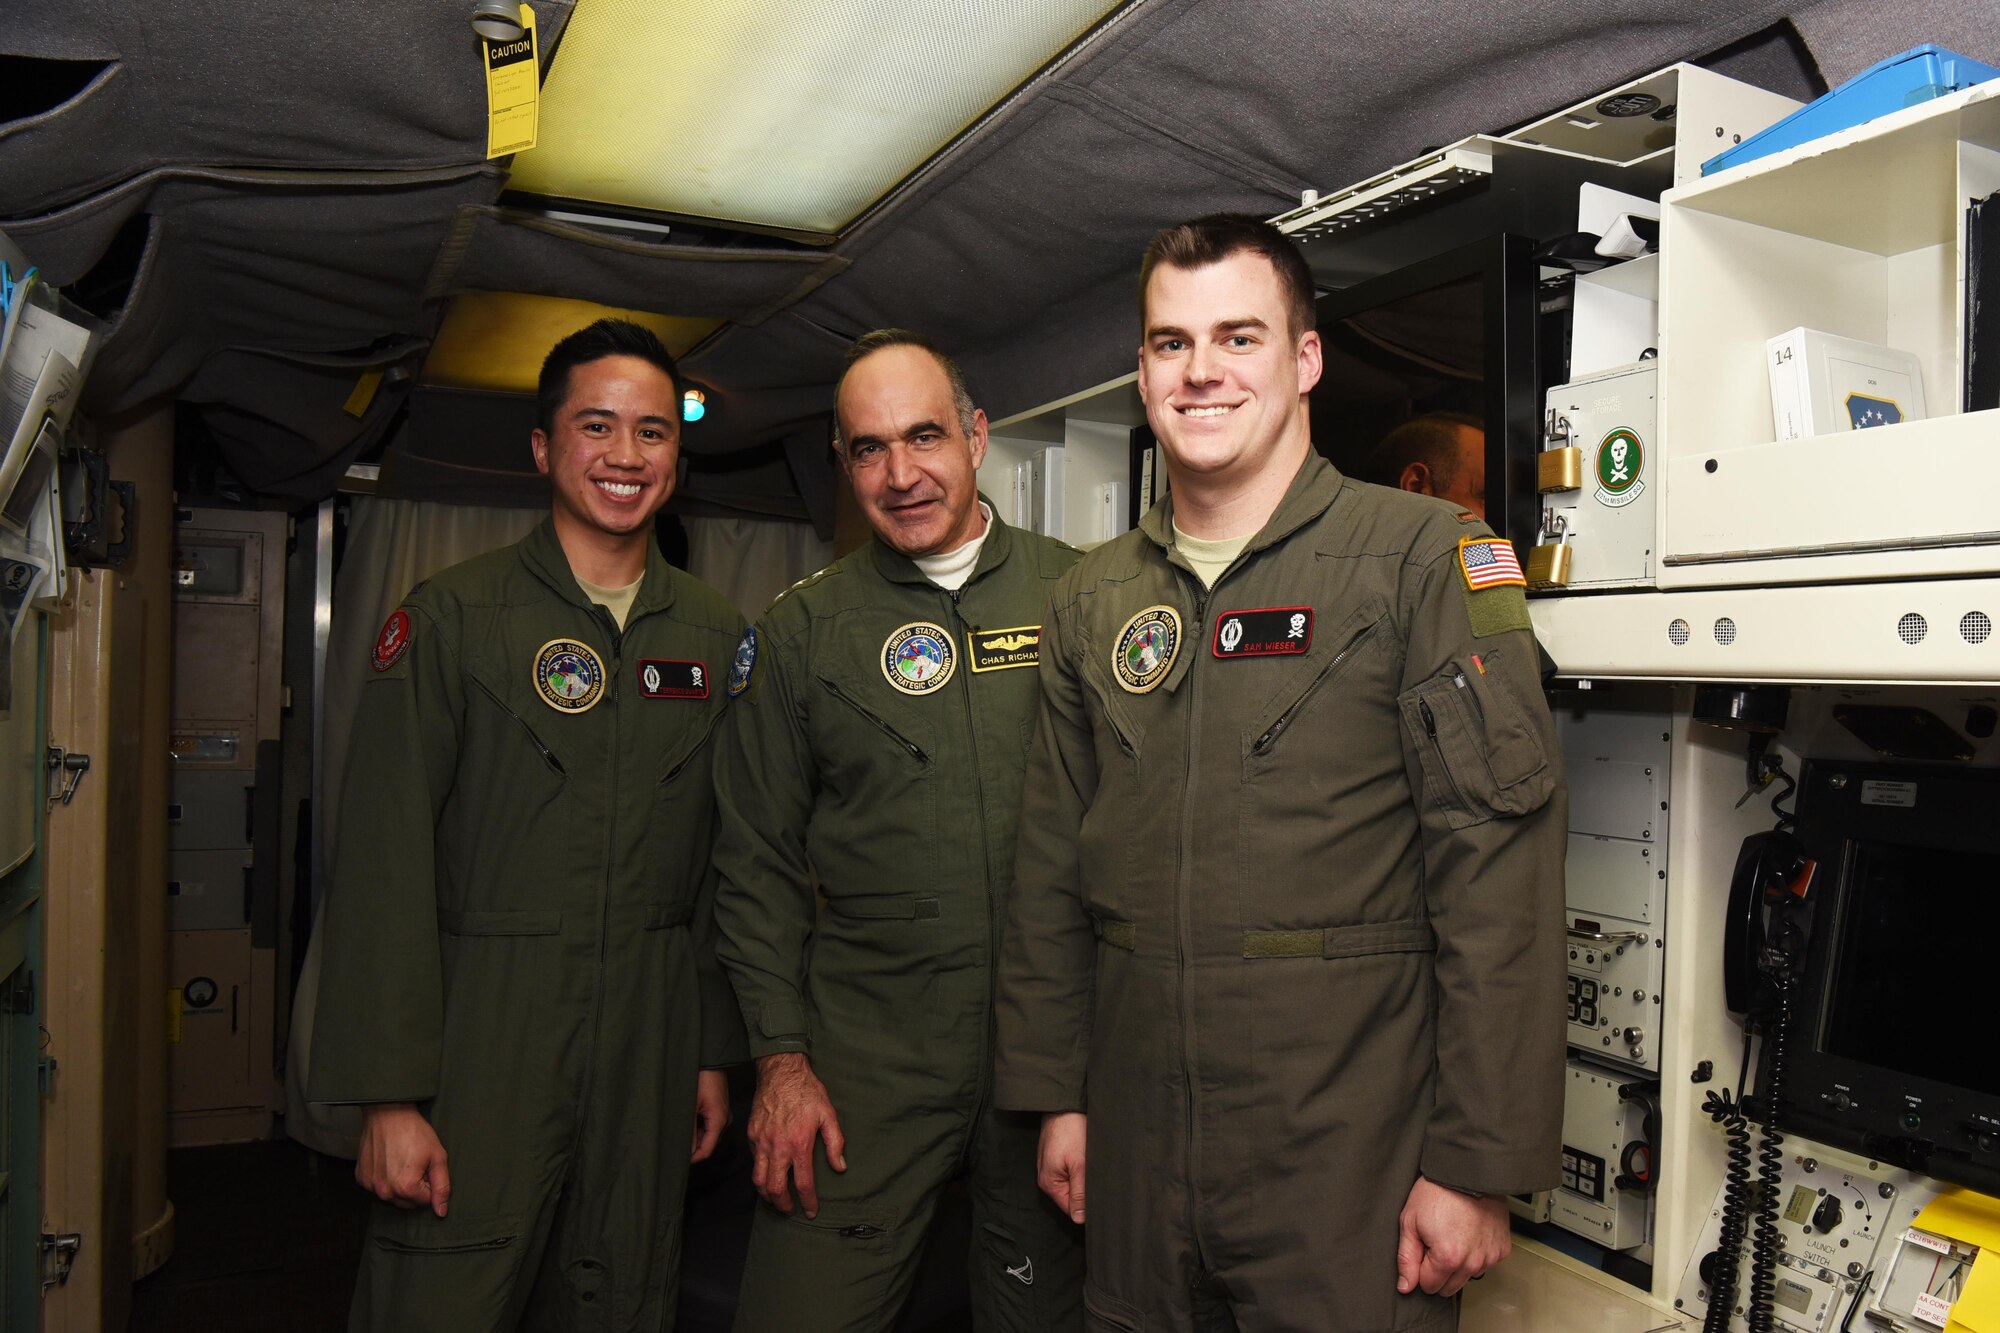 U.S. Navy Vice Adm. Charles “Chas” A. Richard, U.S. Strategic Command deputy commander, visits with 1st Lt. Terrence Duarte, 320th Missile Squadron missile combat crew commander, and 2nd Lt. Samuel Wieser, 320th MS deputy missile combat crew commander, inside a launch control center in the 90th Missile Wing missile complex, Jan. 26, 2017. (U.S. Air Force photo by Airman 1st Class Breanna Carter)